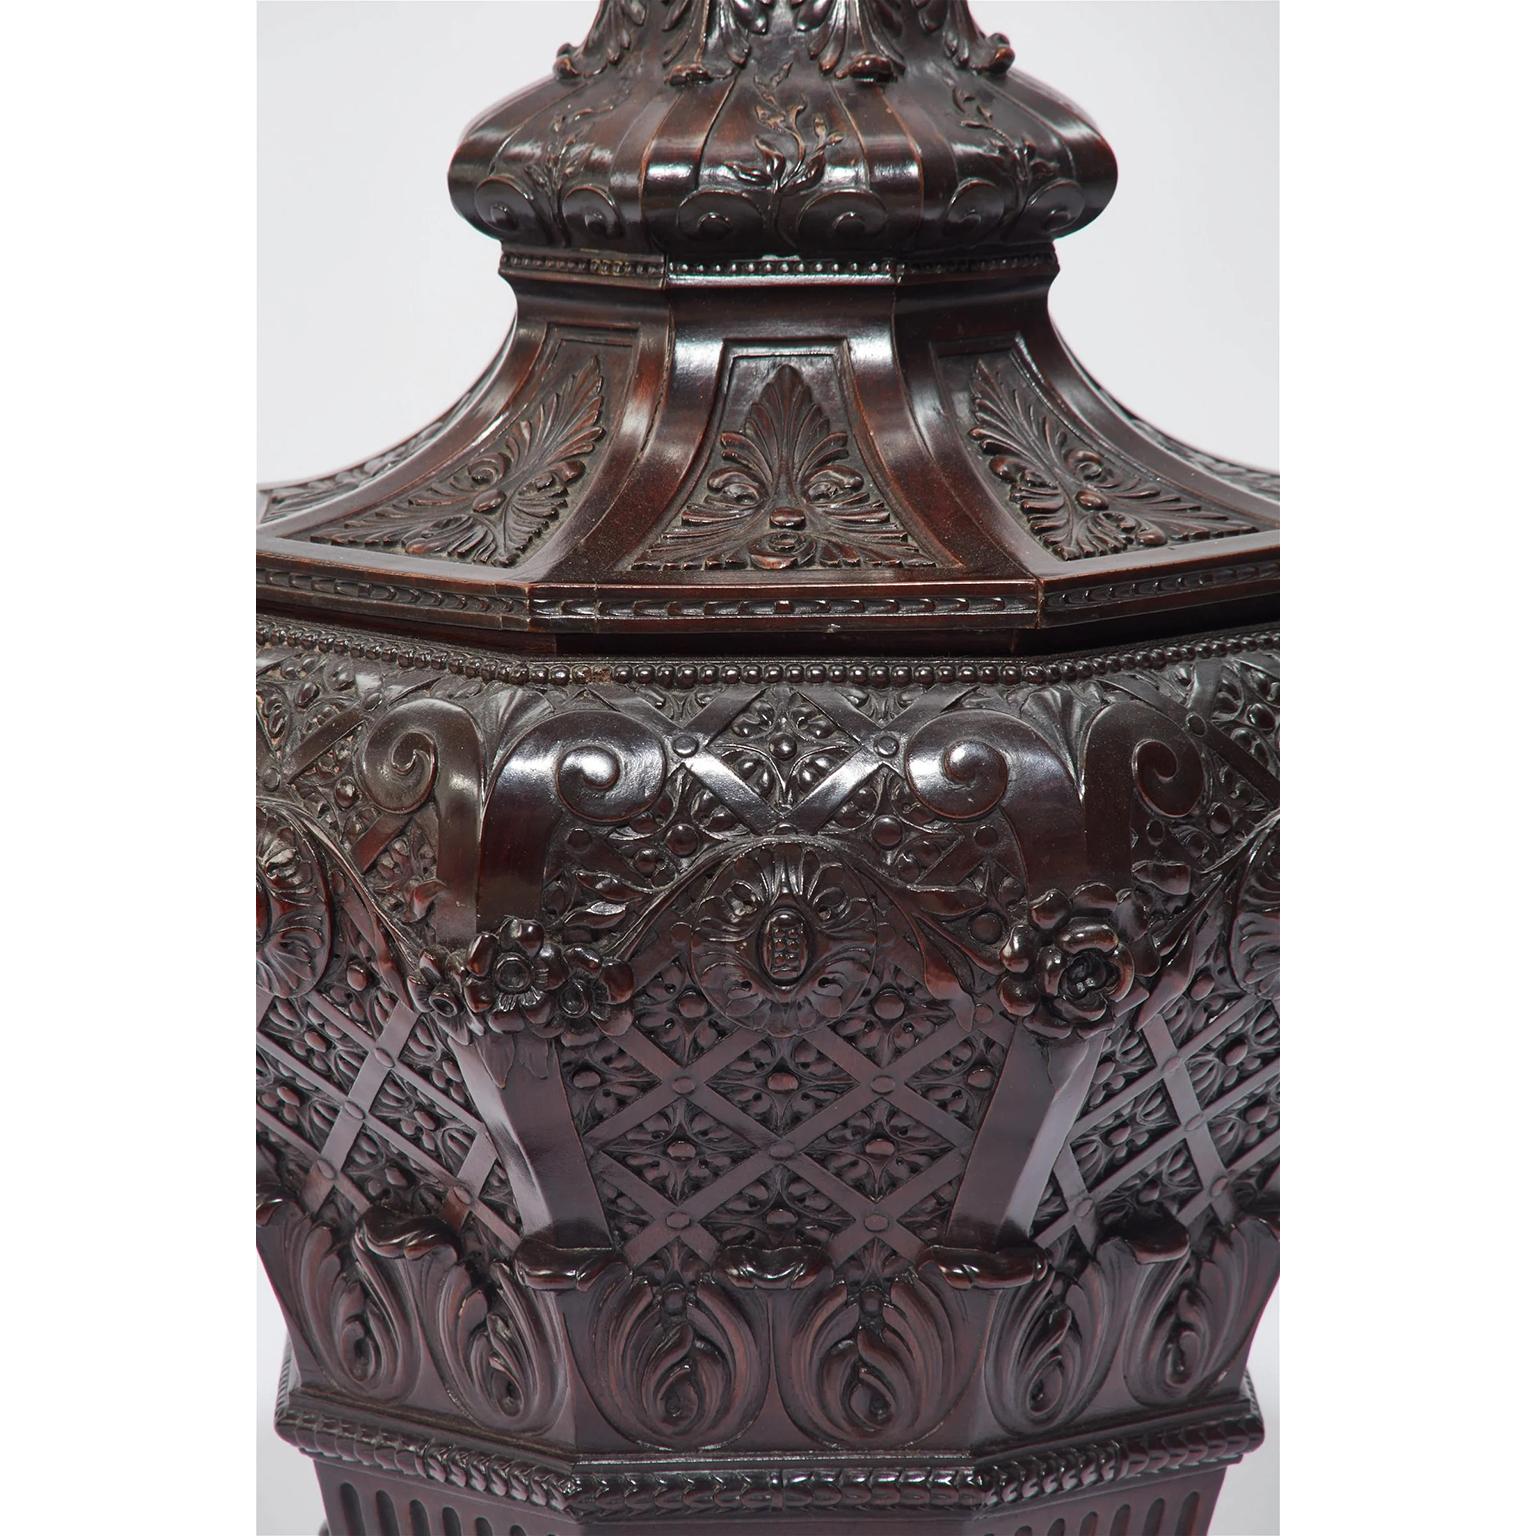 Pair 19th Century Regency Style Carved Mahogany Cellarette Urns or Wine Coolers In Good Condition For Sale In Los Angeles, CA